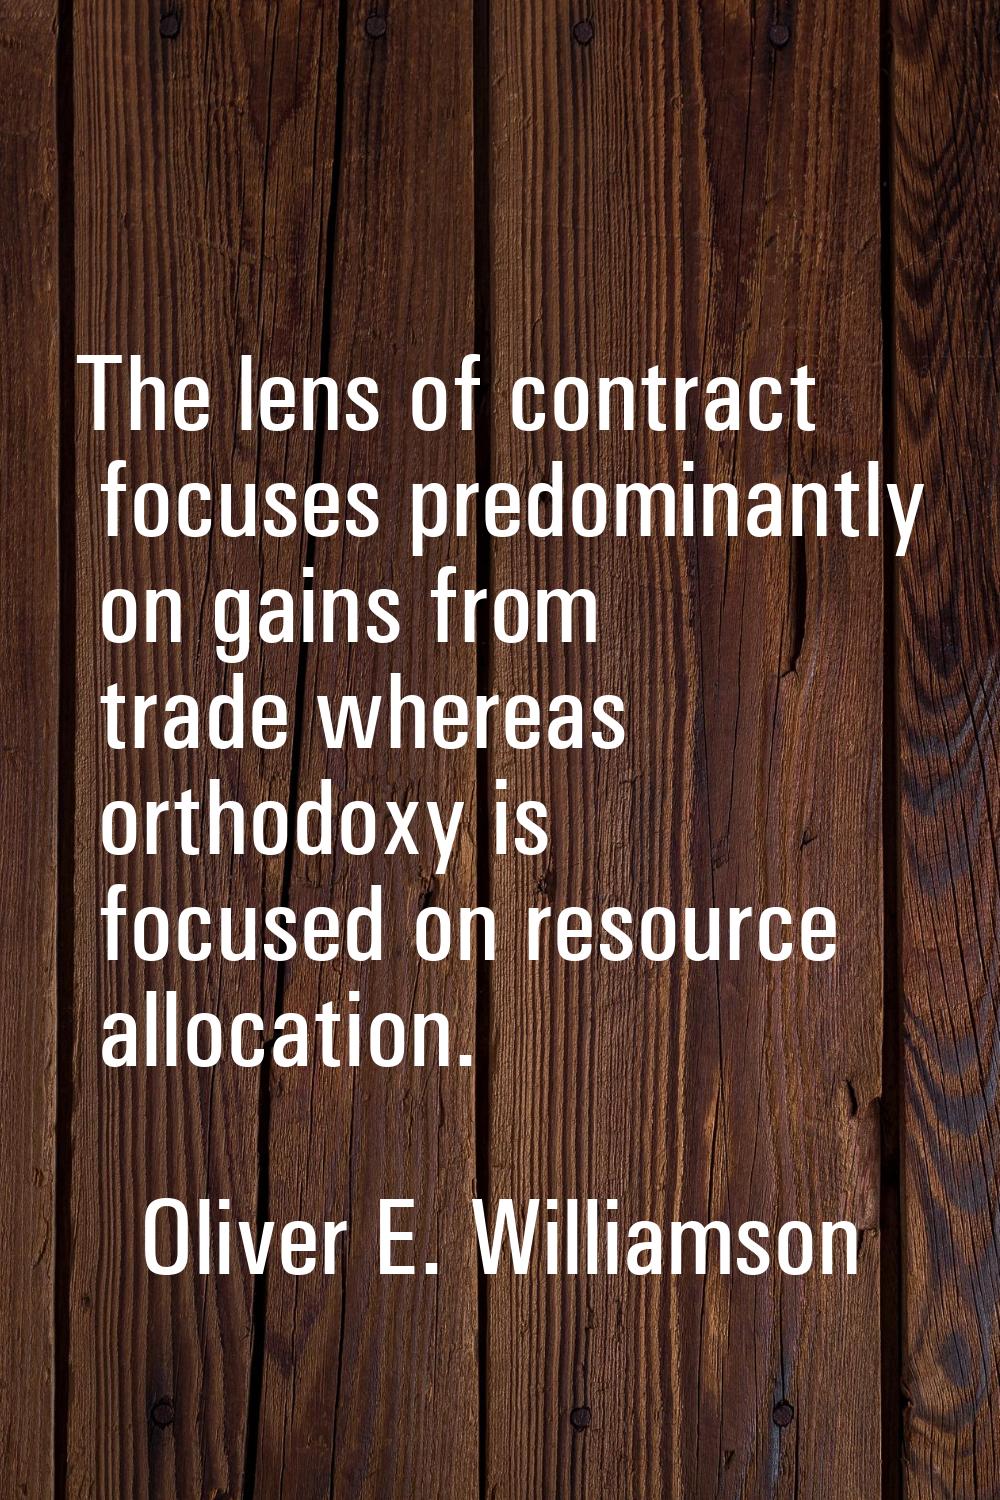 The lens of contract focuses predominantly on gains from trade whereas orthodoxy is focused on reso